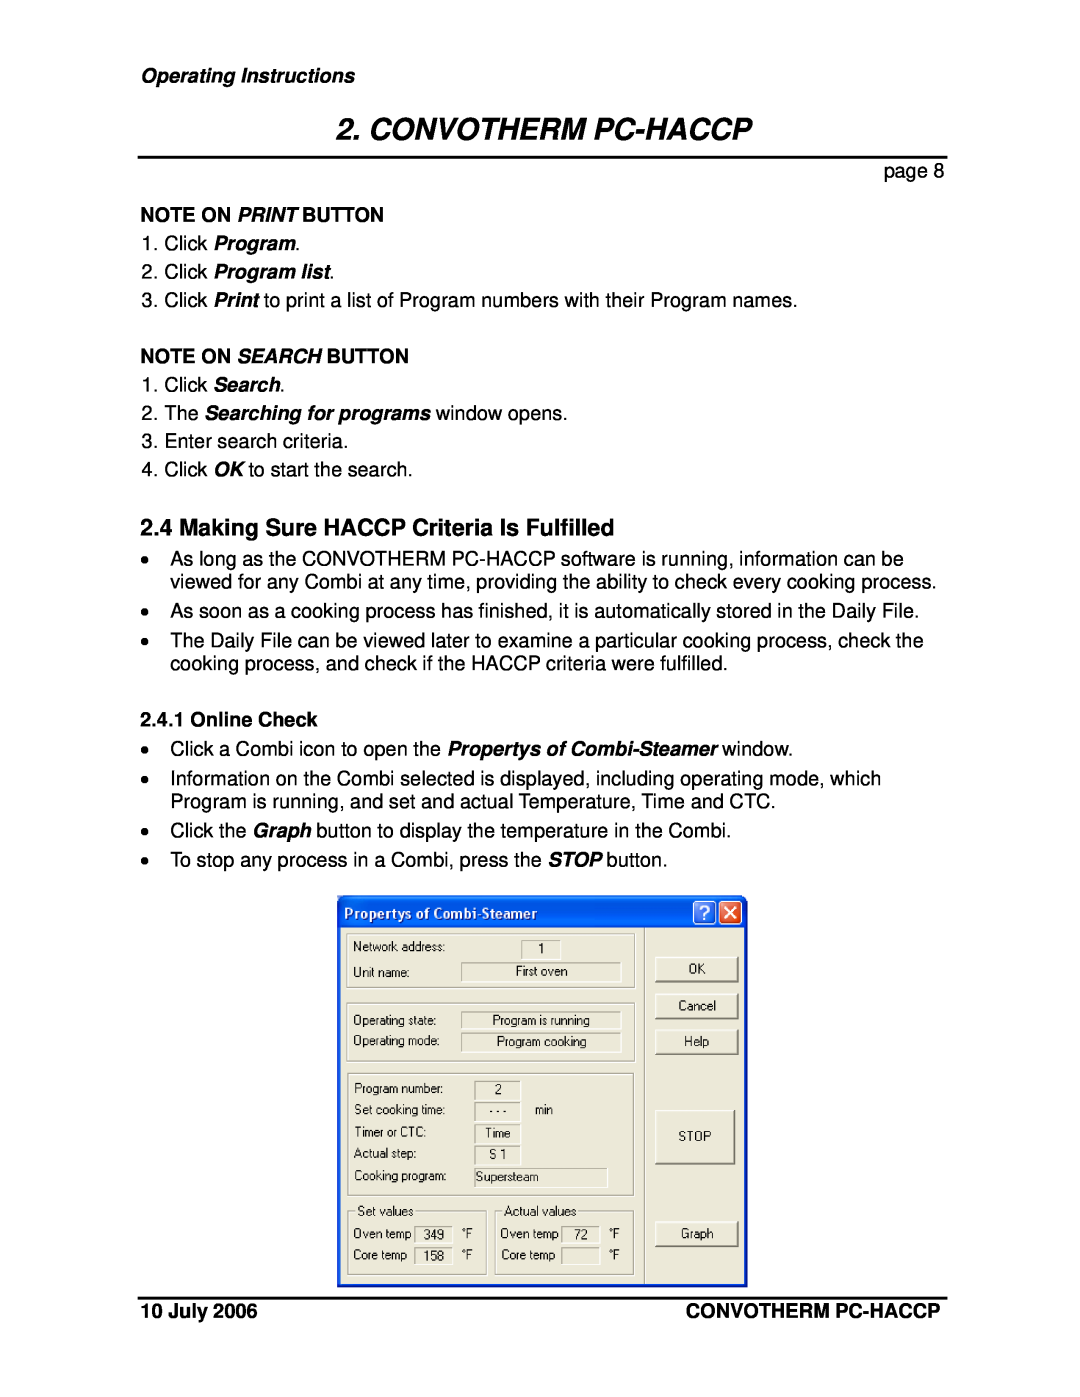 Cleveland Range PC-HACCP Making Sure HACCP Criteria Is Fulfilled, Note On Print Button, Click Program list, Online Check 